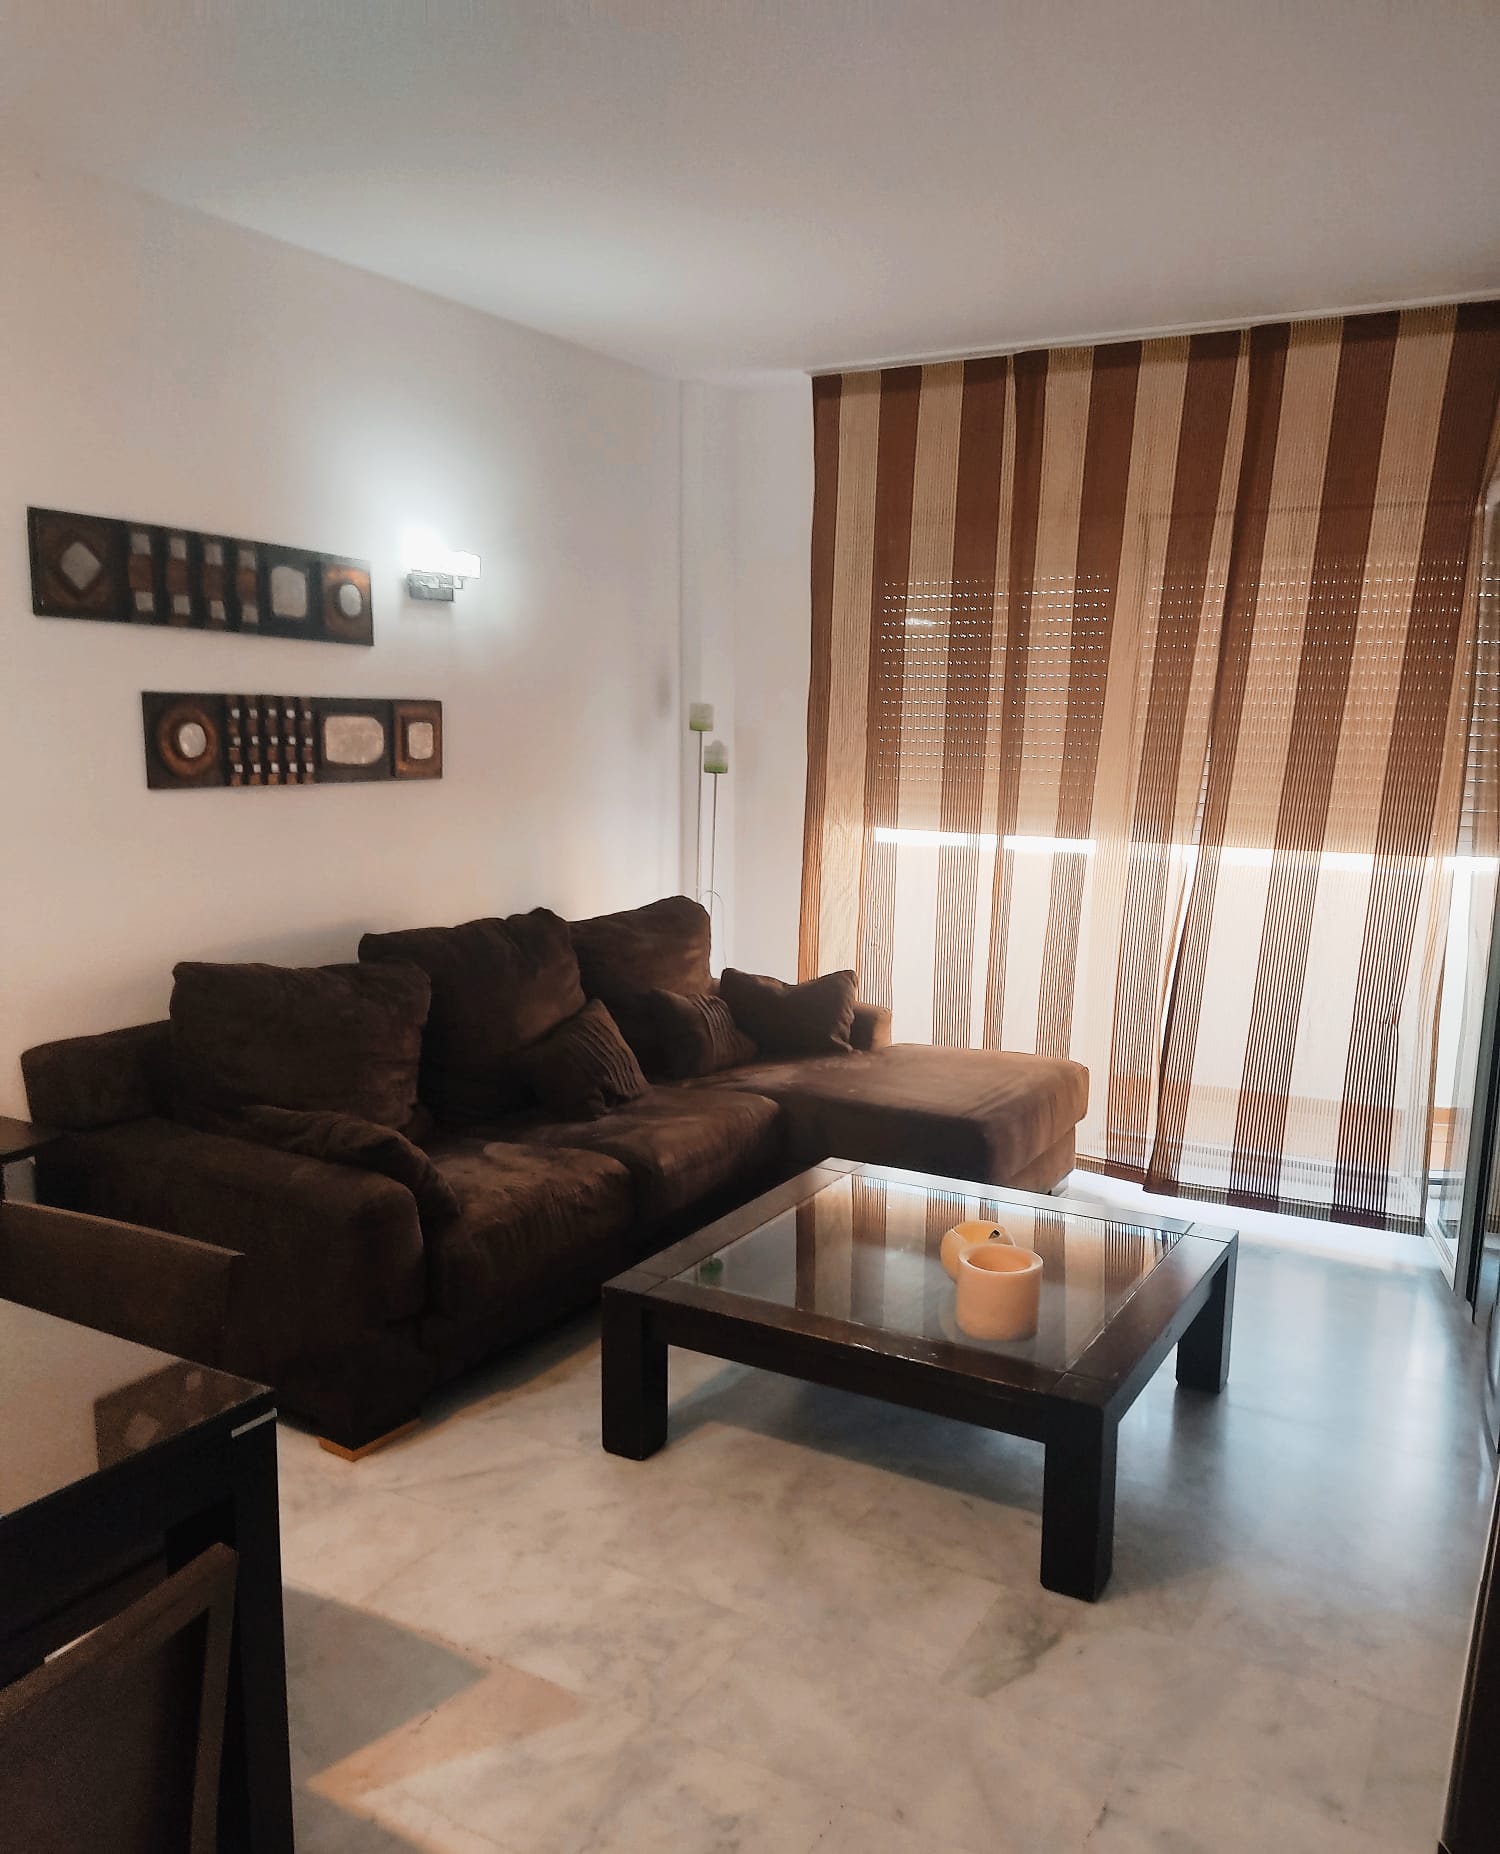 2 bedroom apartment for rent in the center of Estepona with garage - mibgroup.es